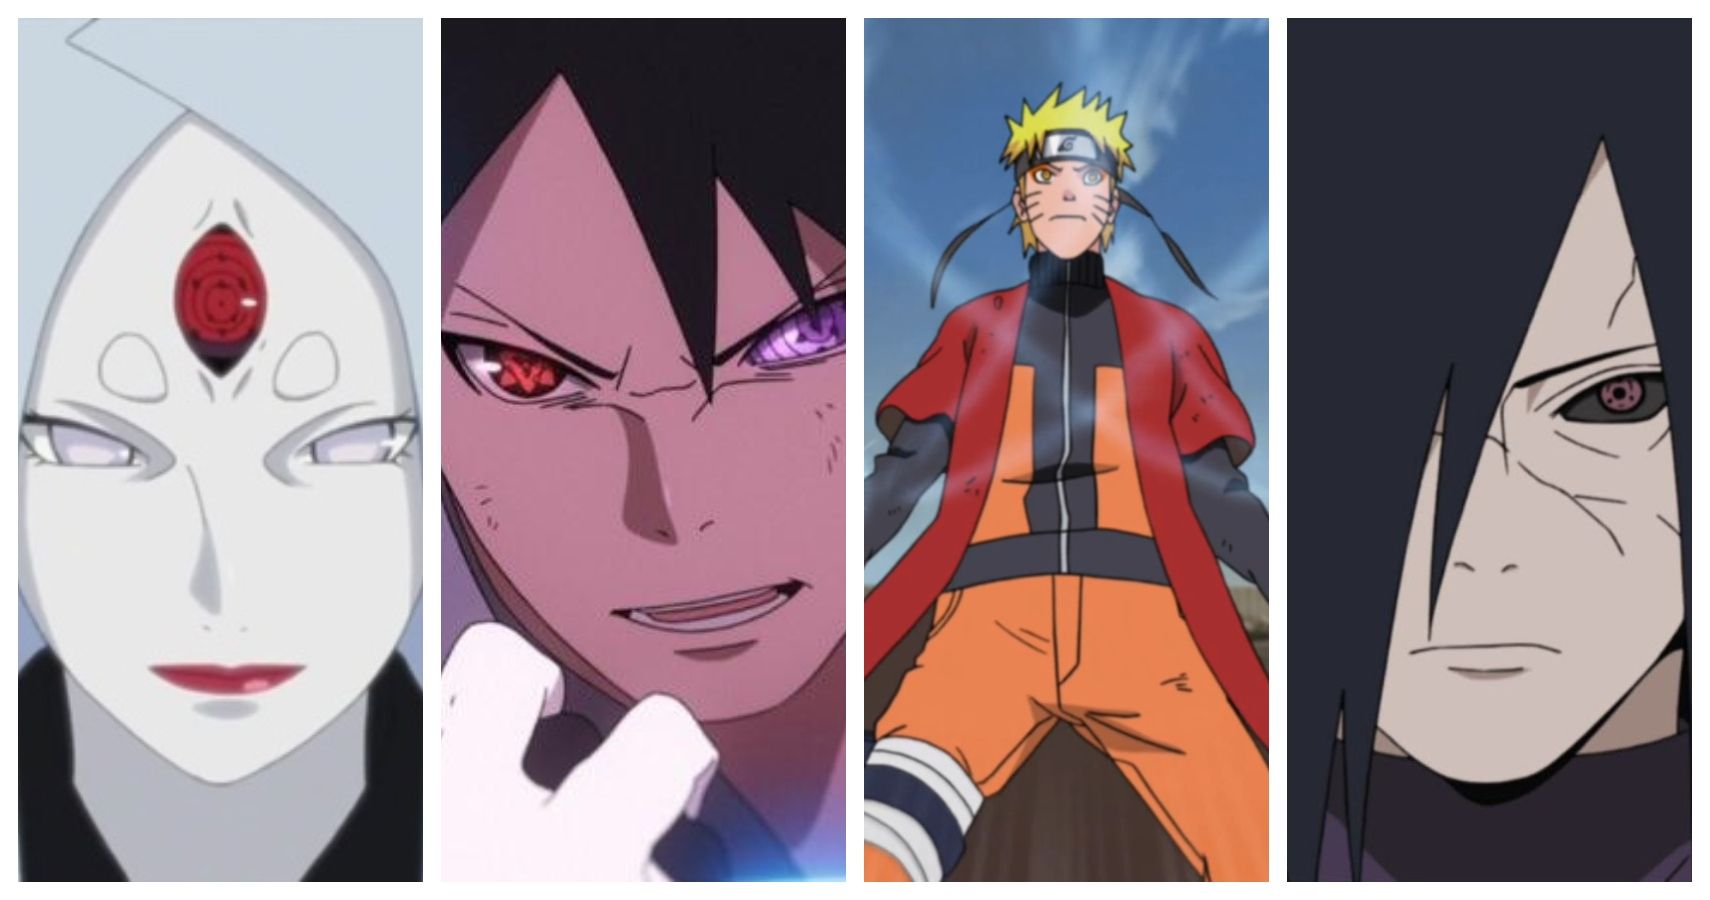 The Top 13 Strongest Characters in Naruto (Ranked) - FanBolt